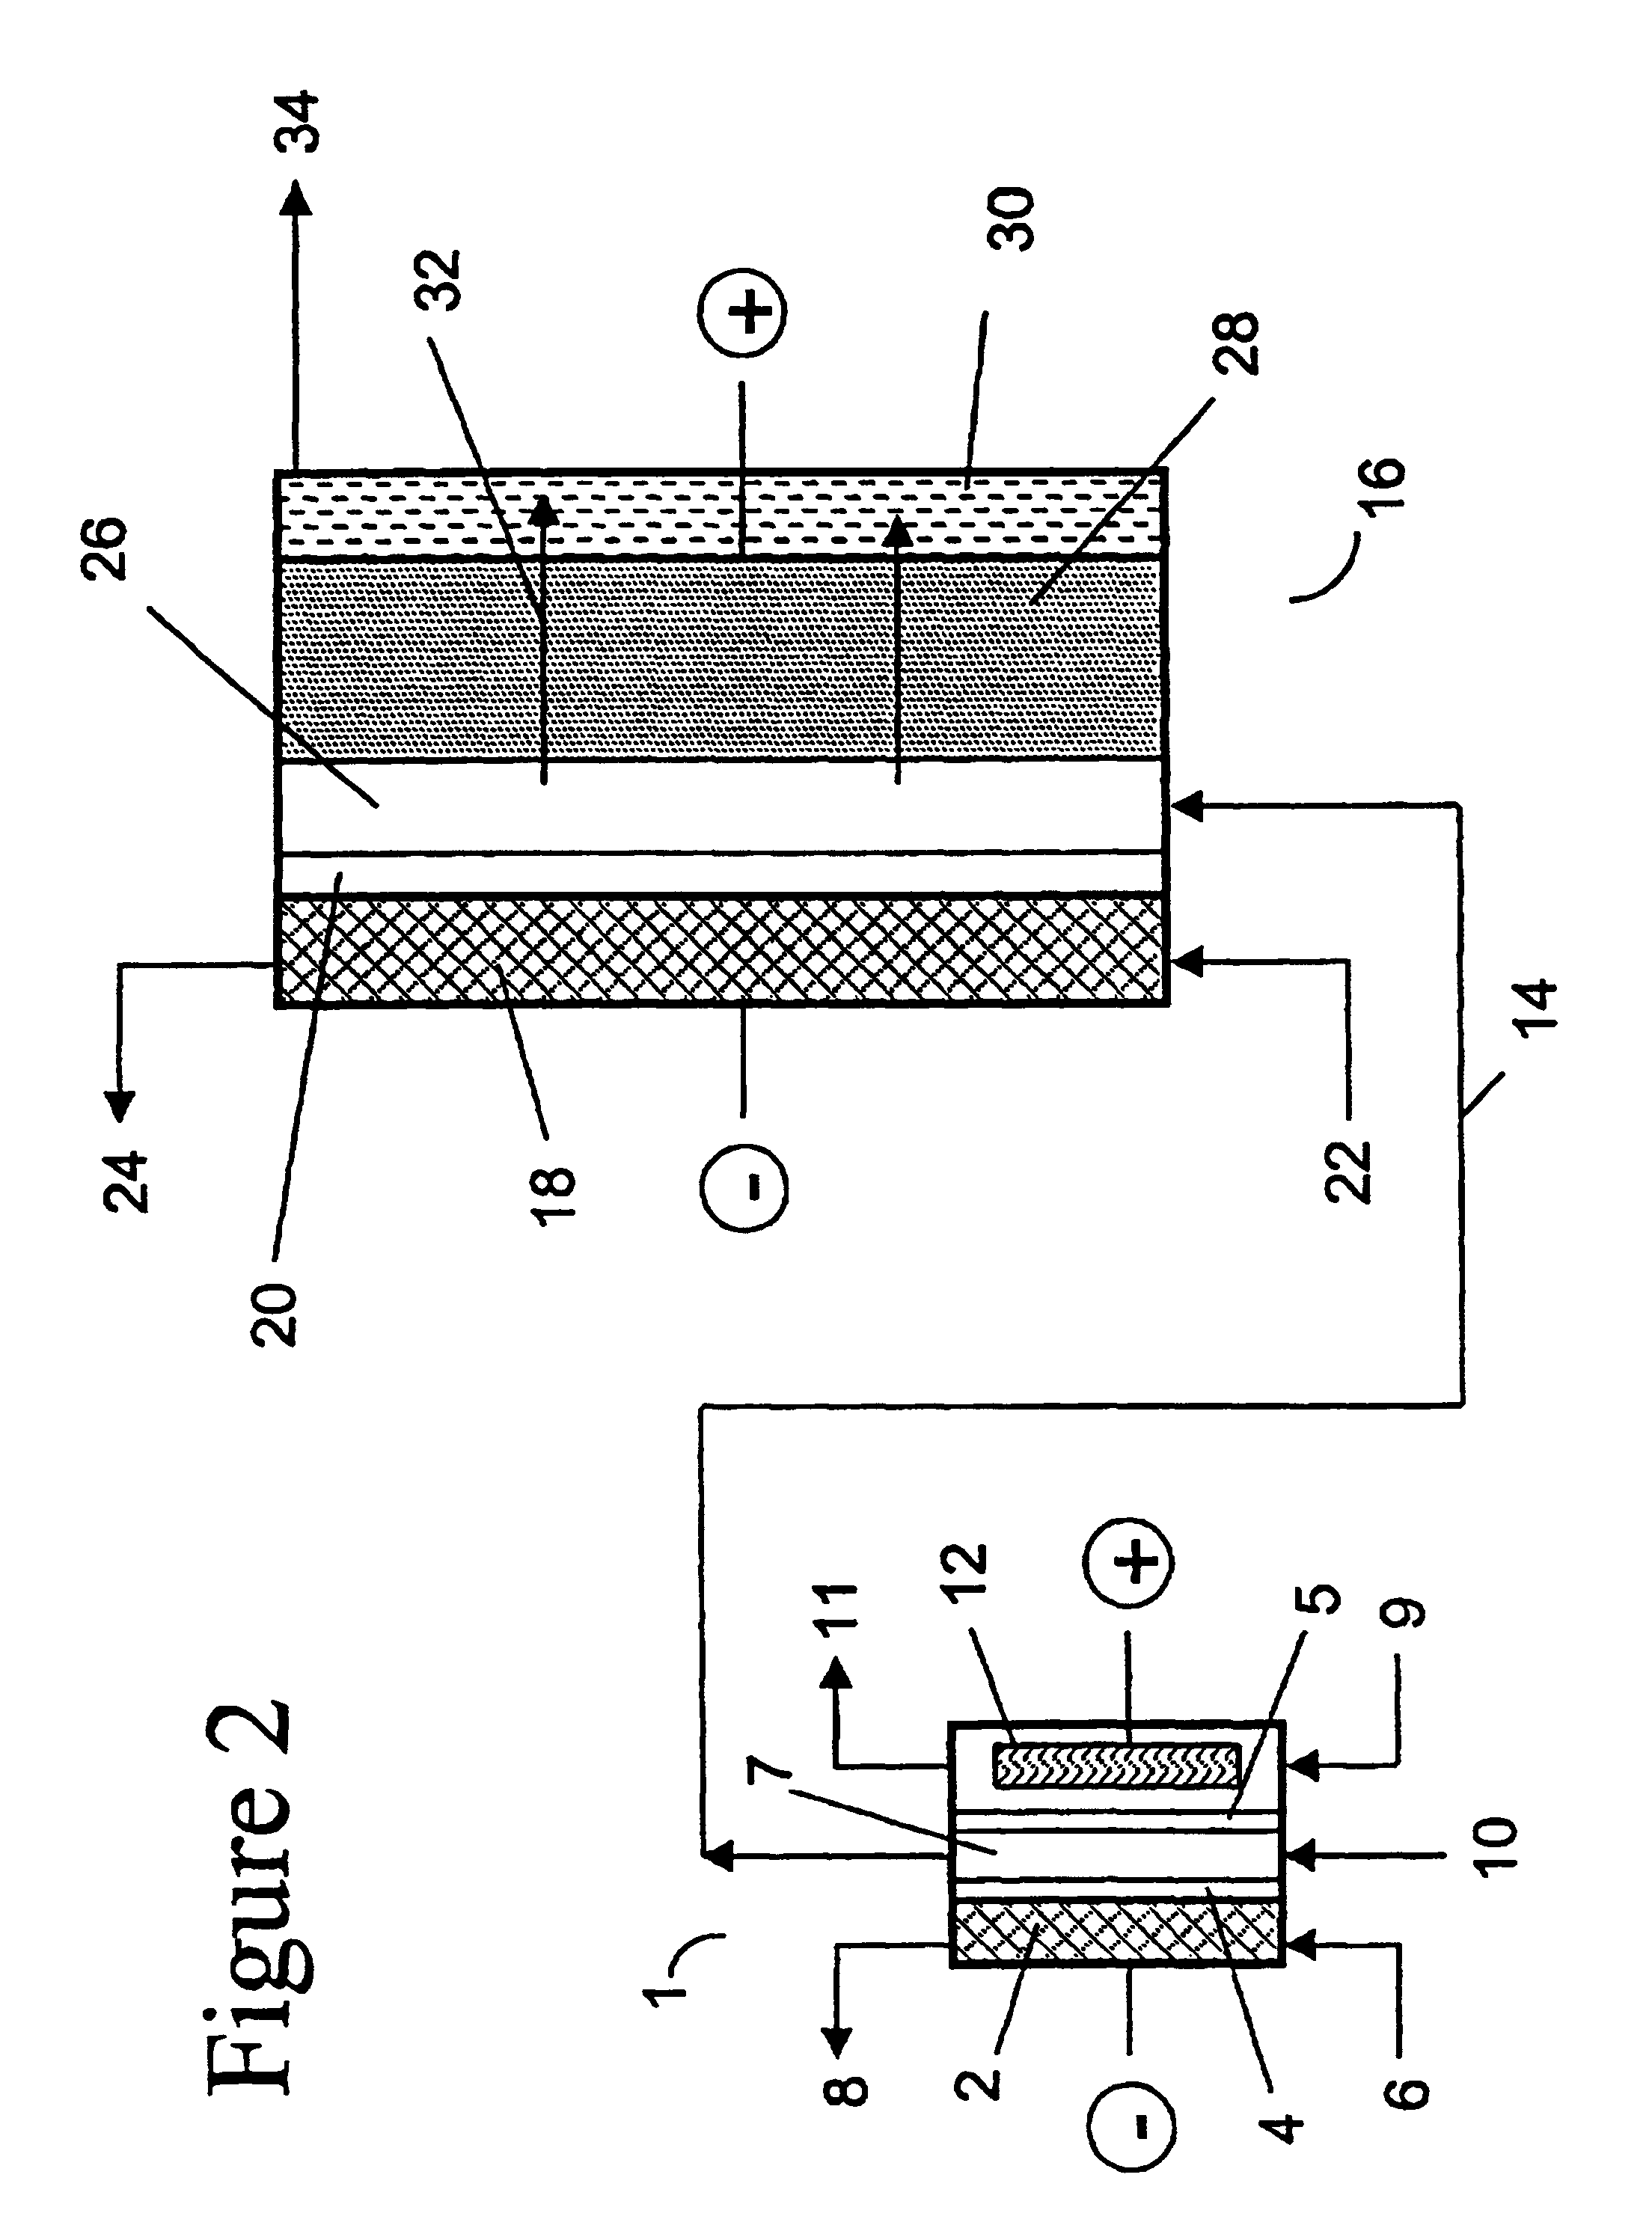 Electrolytic process for producing chlorine dioxide